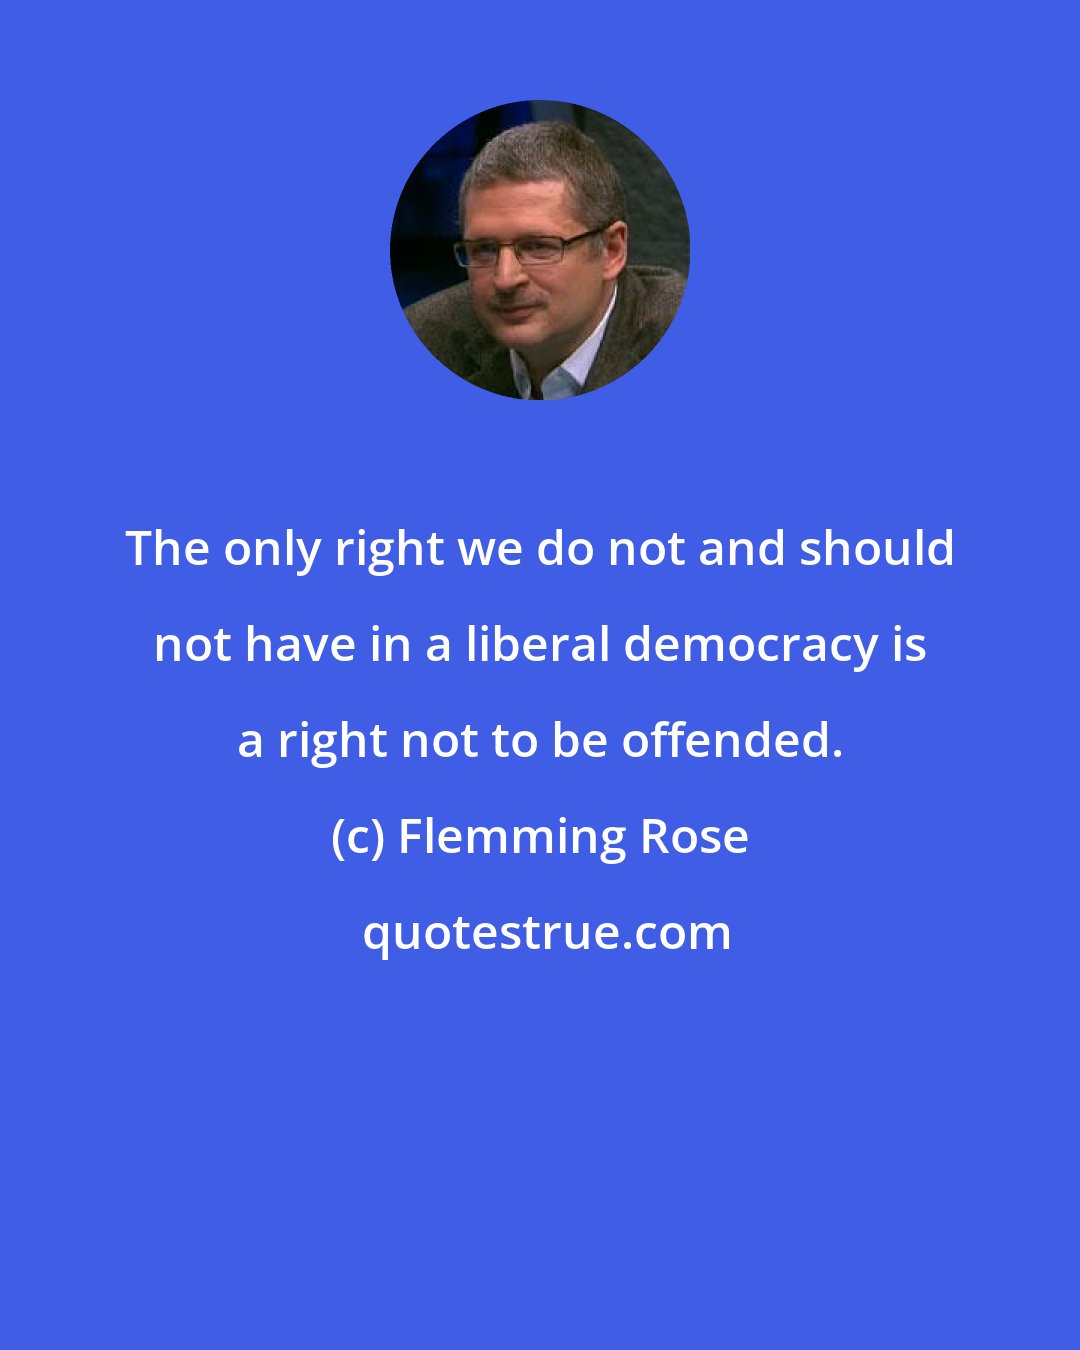 Flemming Rose: The only right we do not and should not have in a liberal democracy is a right not to be offended.